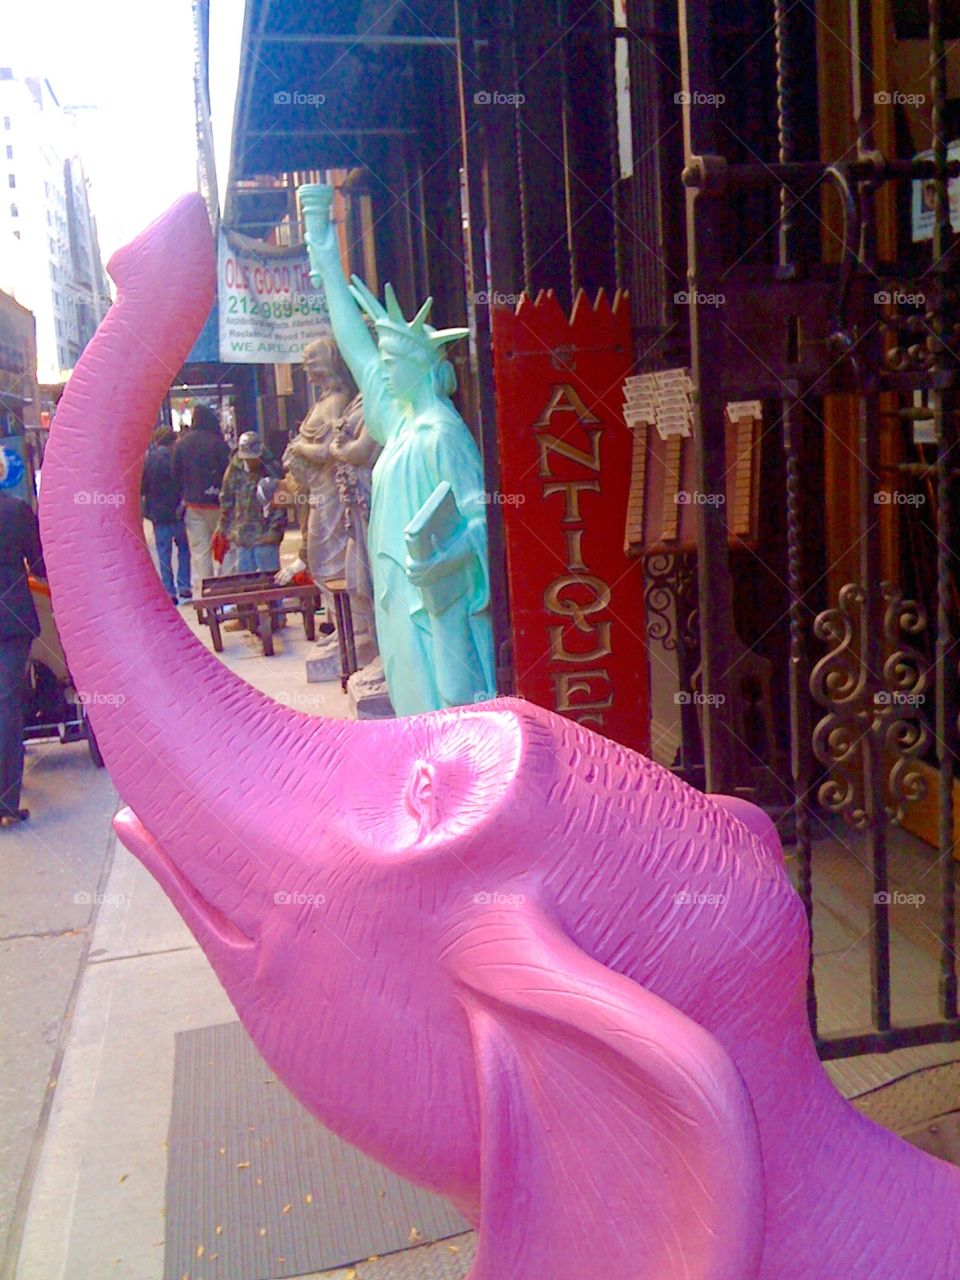 Pink Elephants on Parade. Pink elephant and Lady Liberty in front of an antique store in Chelsea, New York City